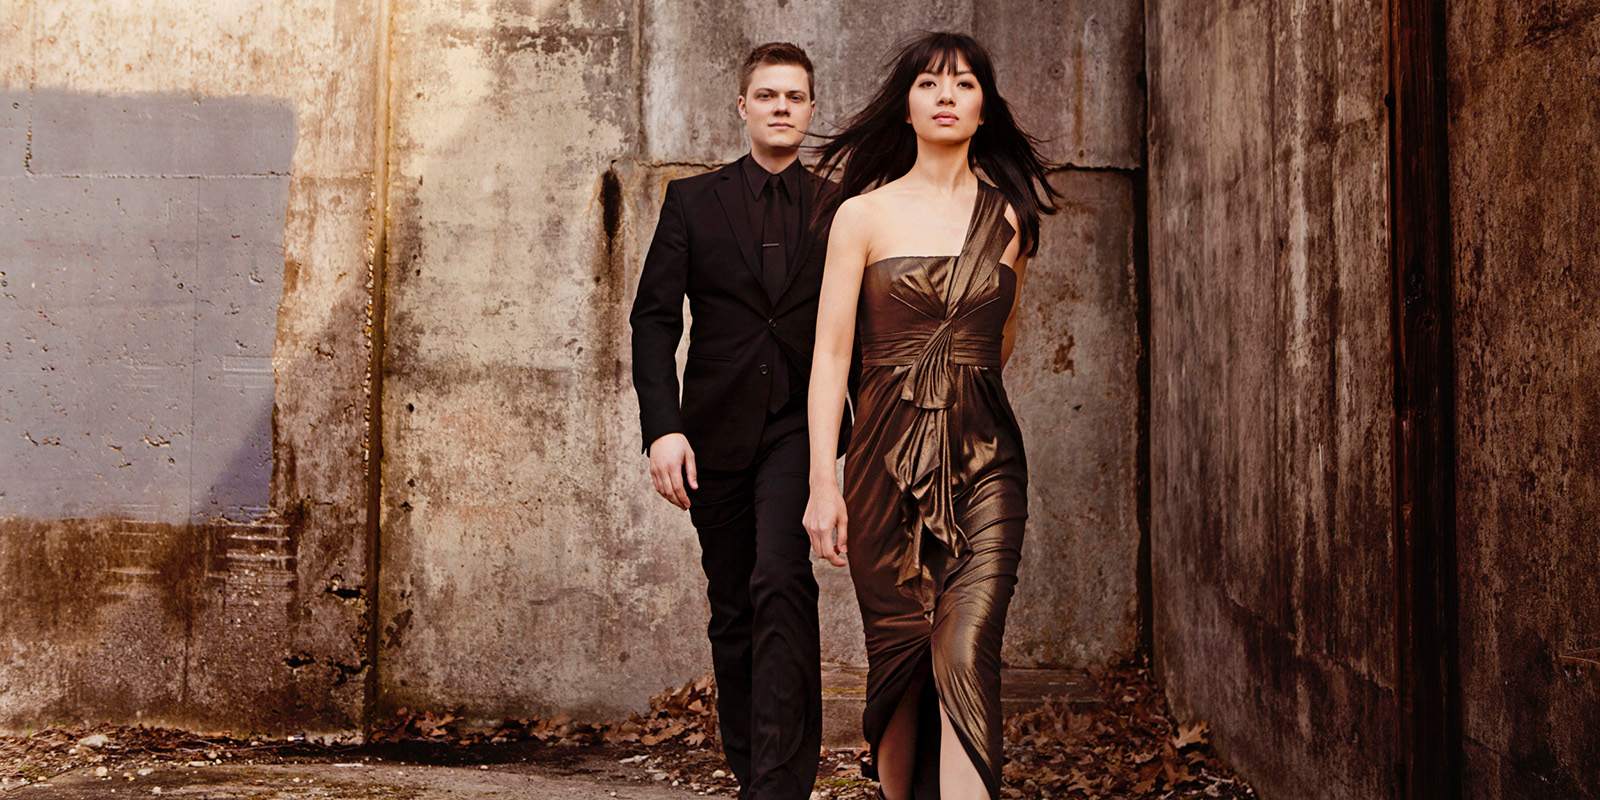 Anderson & Roe Piano Duo to Bring Fiery Performances to the UGA Performing Arts Center